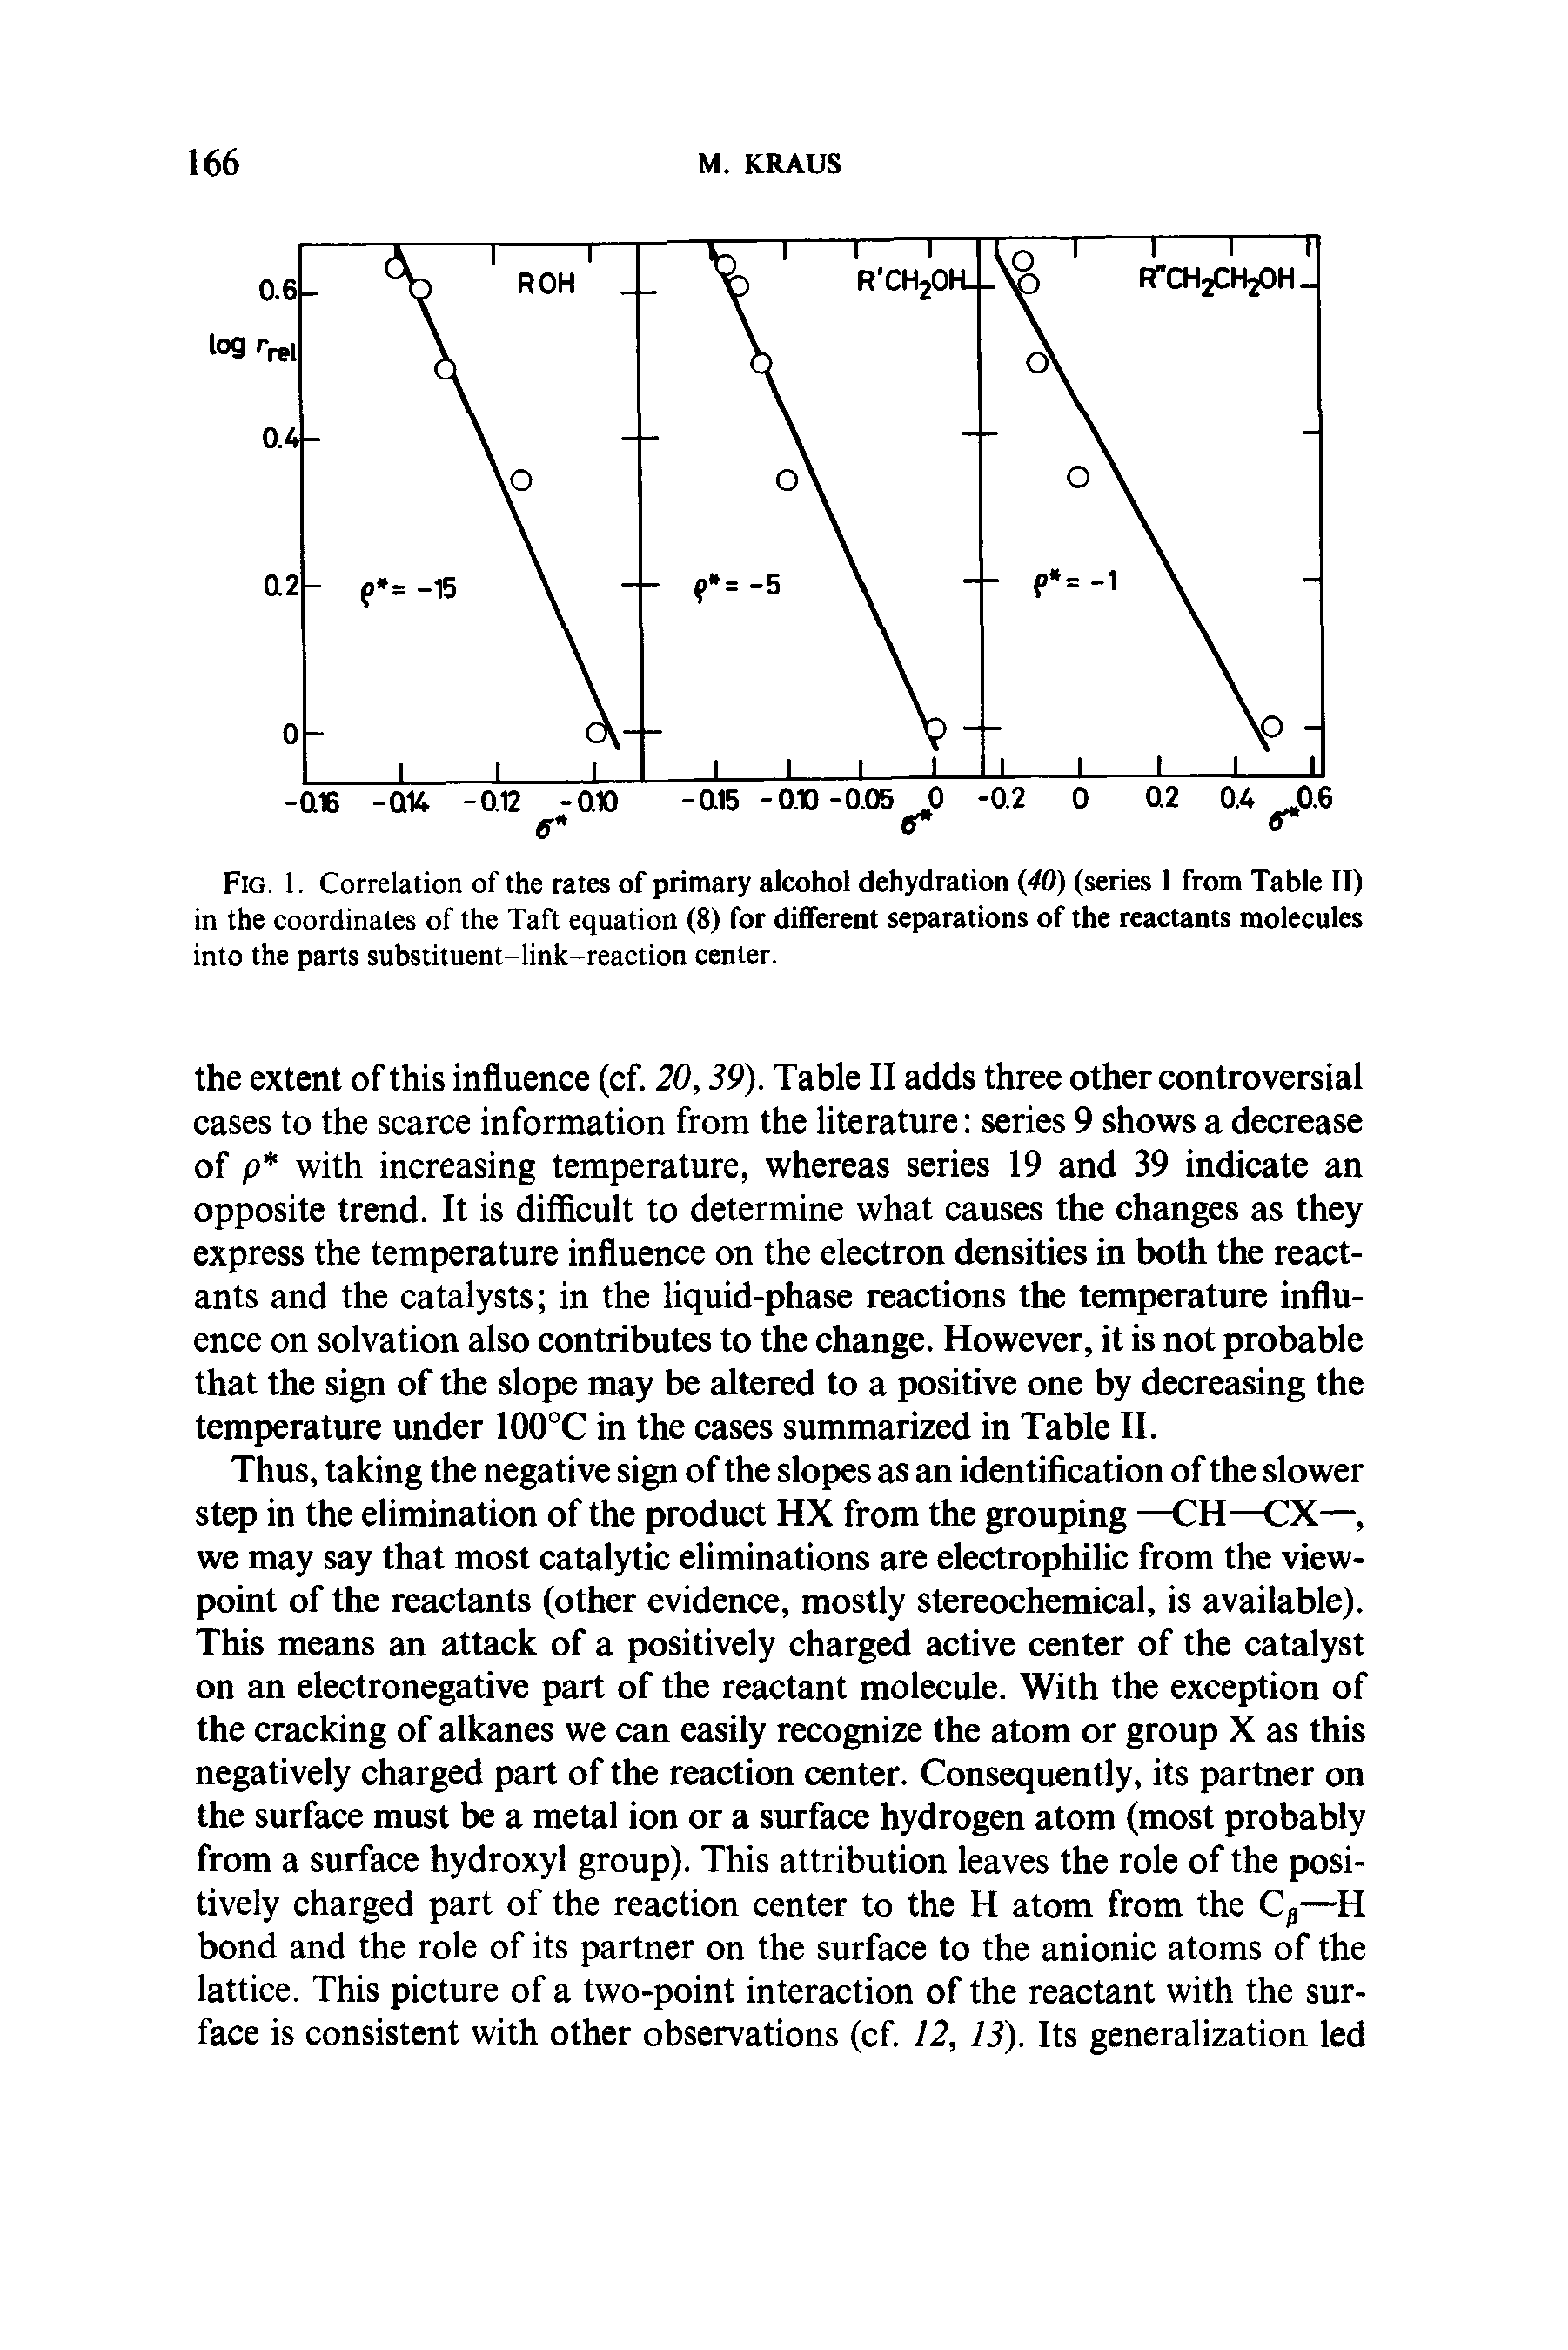 Fig. 1. Correlation of the rates of primary alcohol dehydration (40) (series 1 from Table II) in the coordinates of the Taft equation (8) for different separations of the reactants molecules into the parts substituent-link-reaction center.